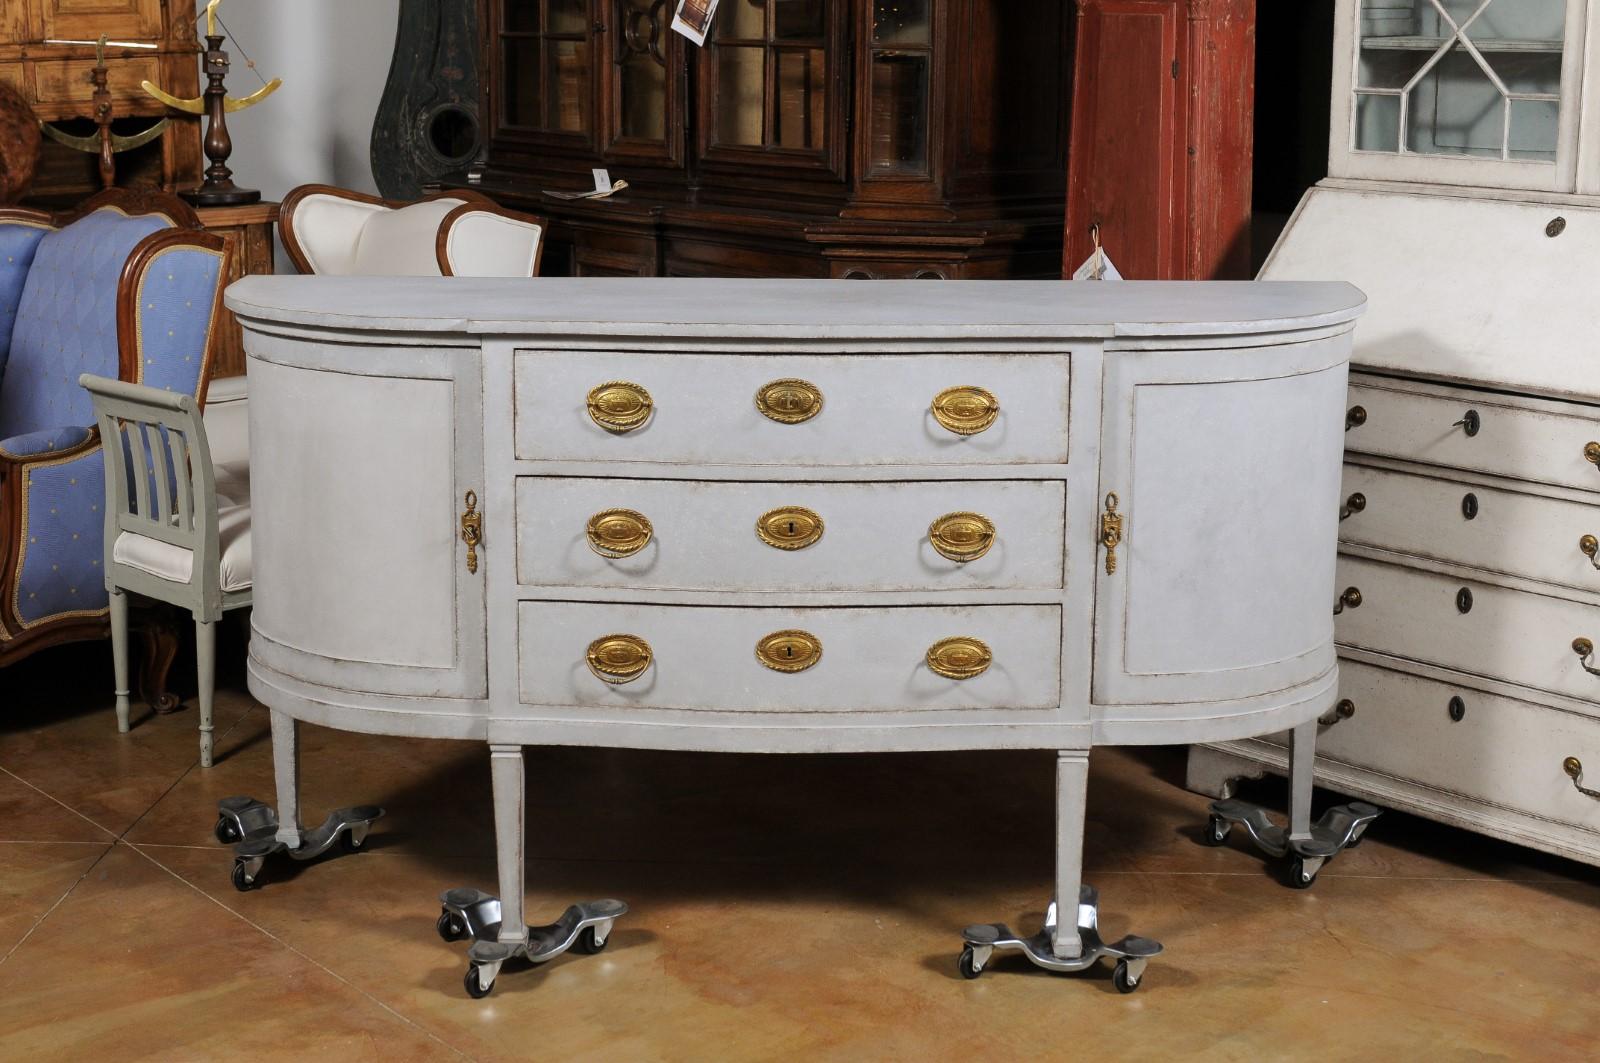 European 1830s Painted Demilune Sideboard with Three Drawers and Rounded Doors For Sale 8